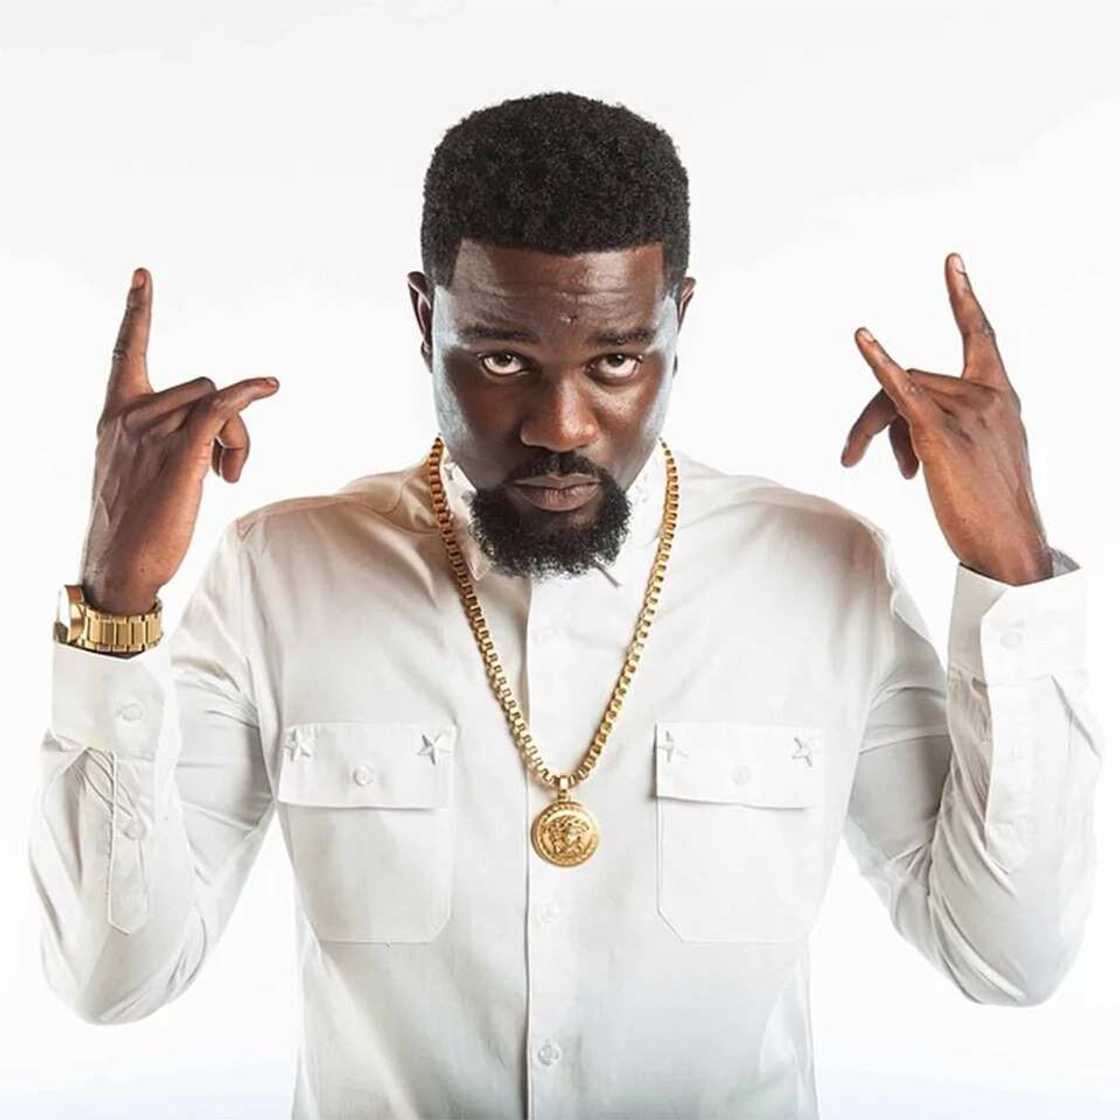 Sarkodie launched his "Sark Collections" in partnership with fashion entrepreneur, YAS.